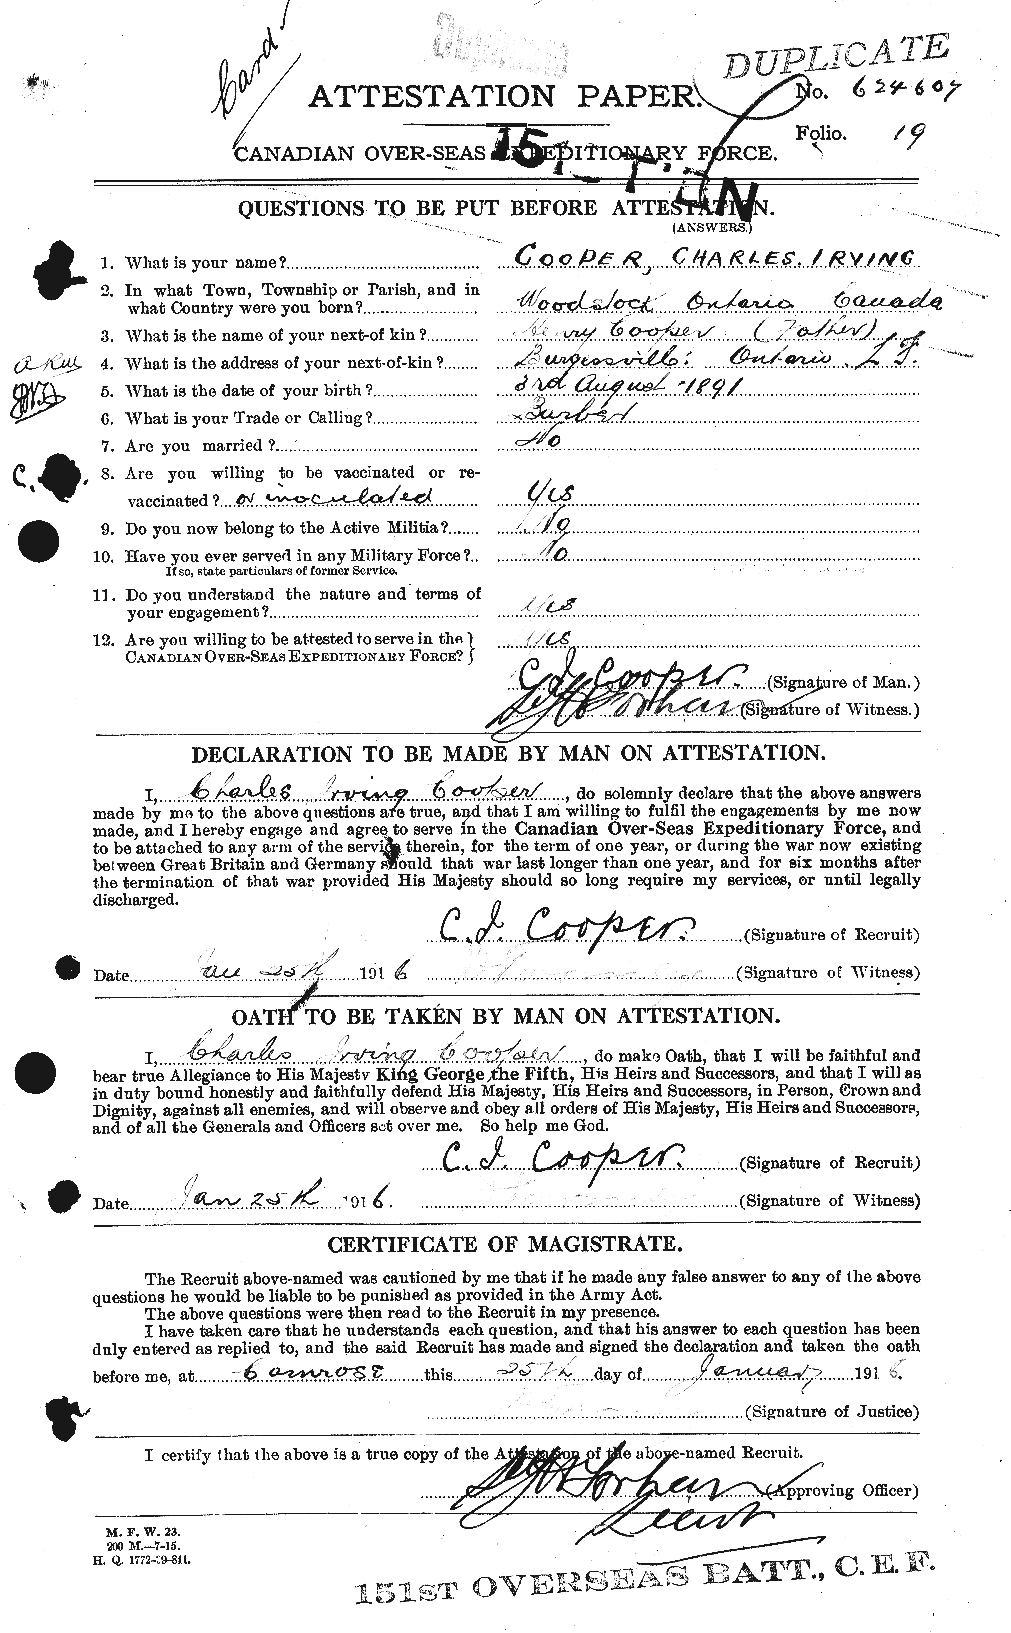 Personnel Records of the First World War - CEF 054244a